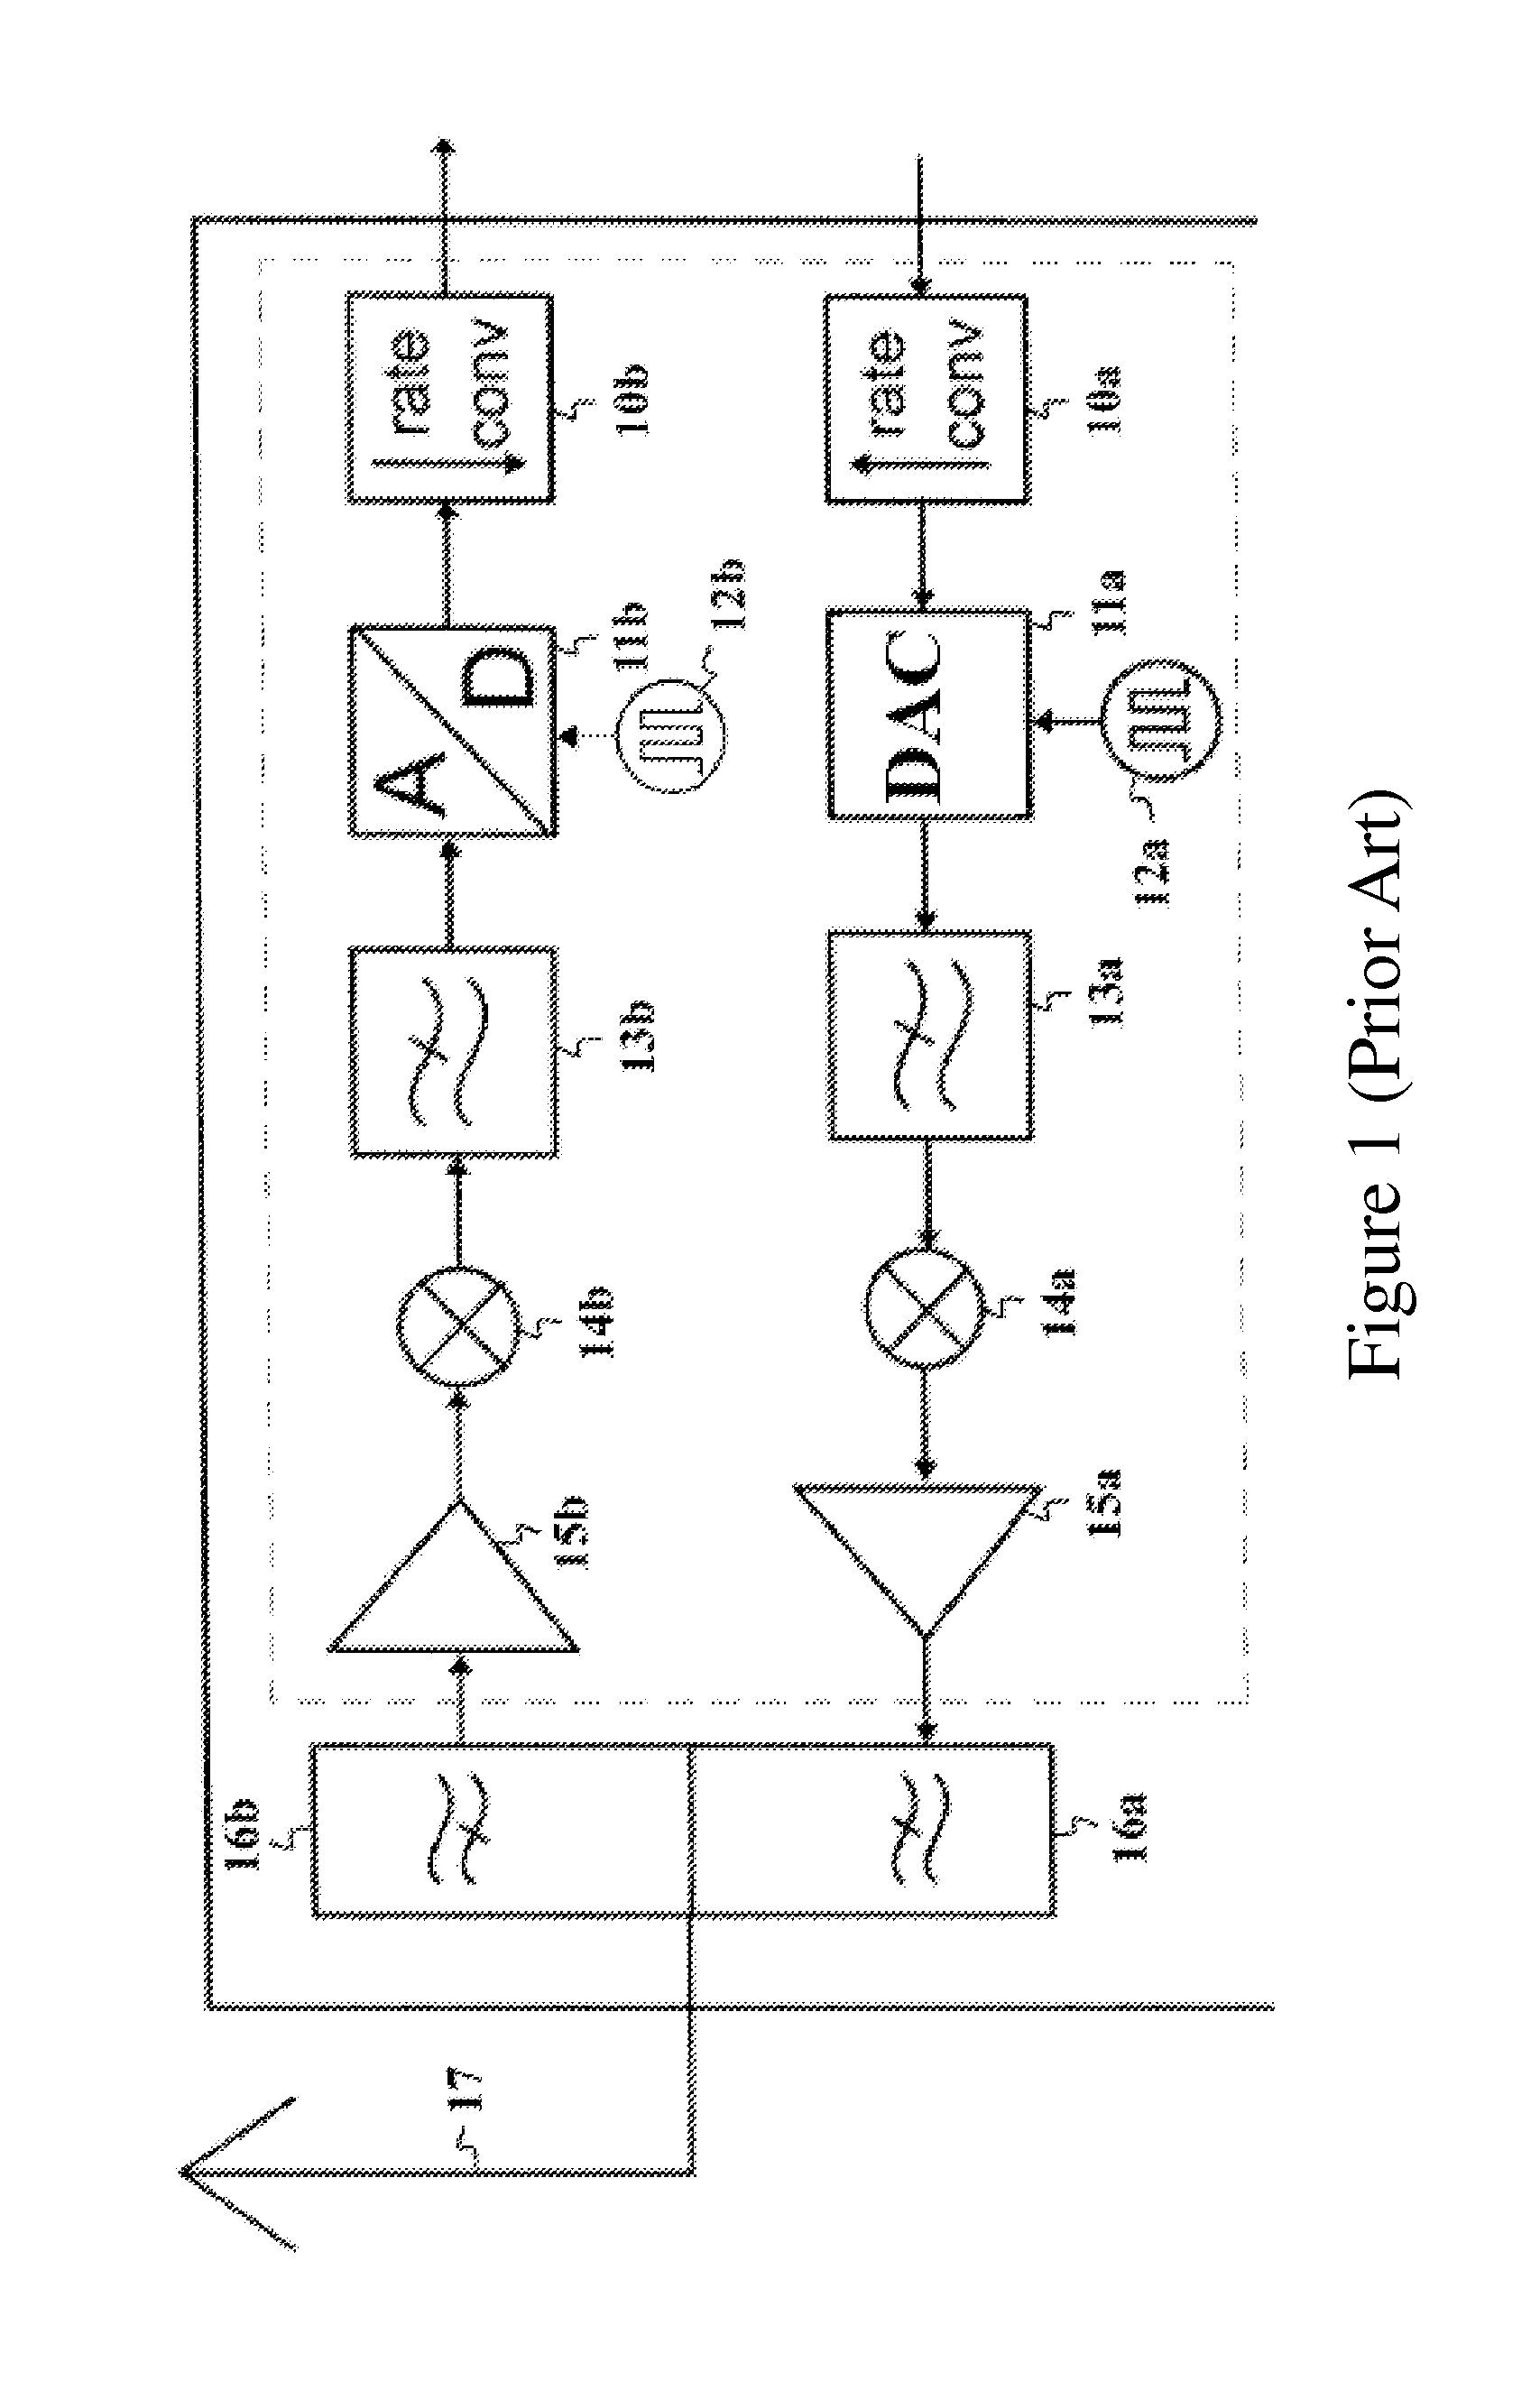 Transmitter with a variable sampling rate